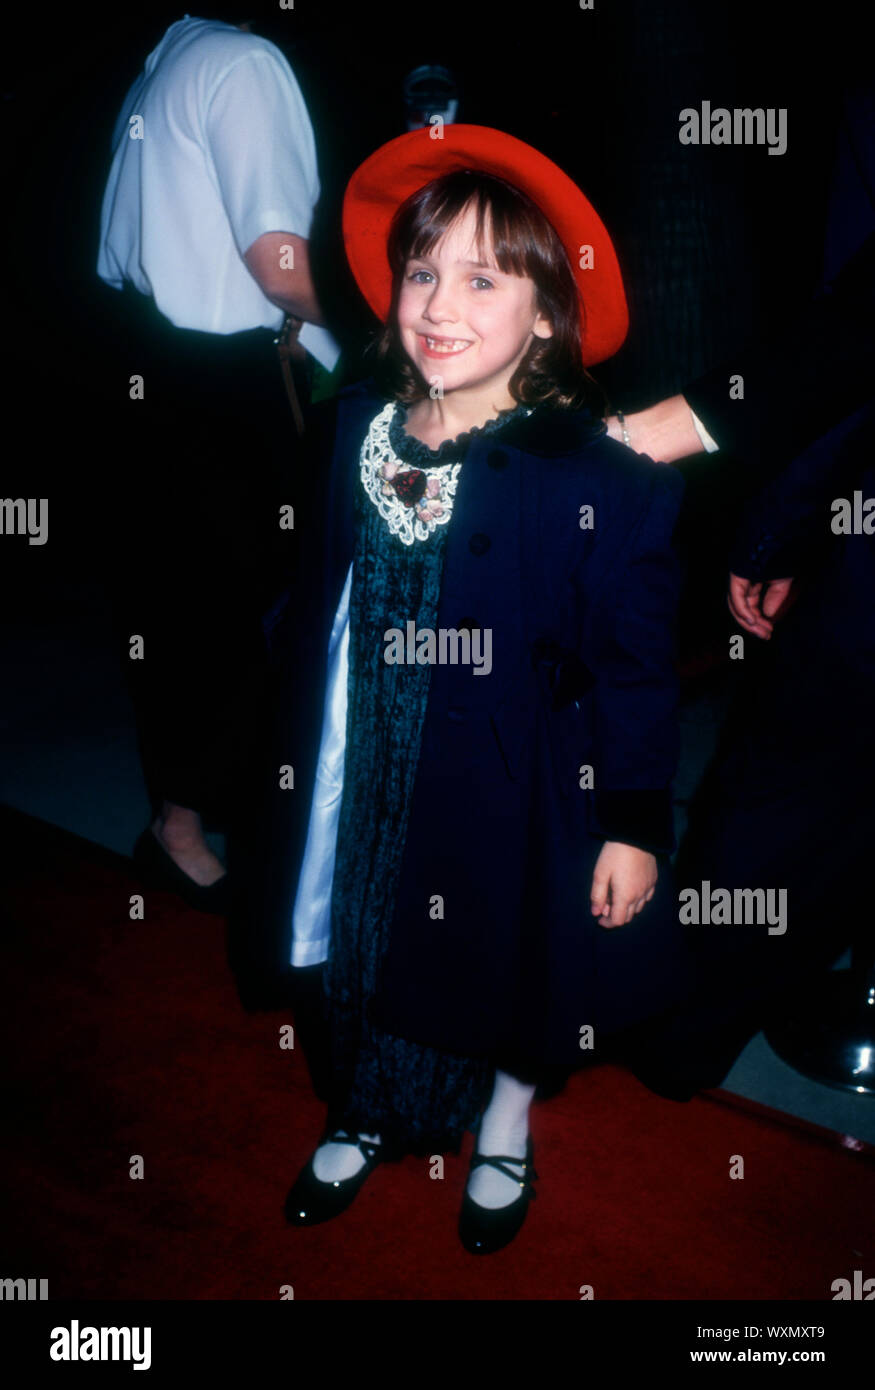 Beverly Hills, California, USA 13th December 1994 Actress Mara Wilson attends 20th Century Fox's 'Nell' Premiere on December 13, 1994 at Academy Theatre in Beverly Hills, California, USA. Photo by Barry King/Alamy Stock Photo Stock Photo